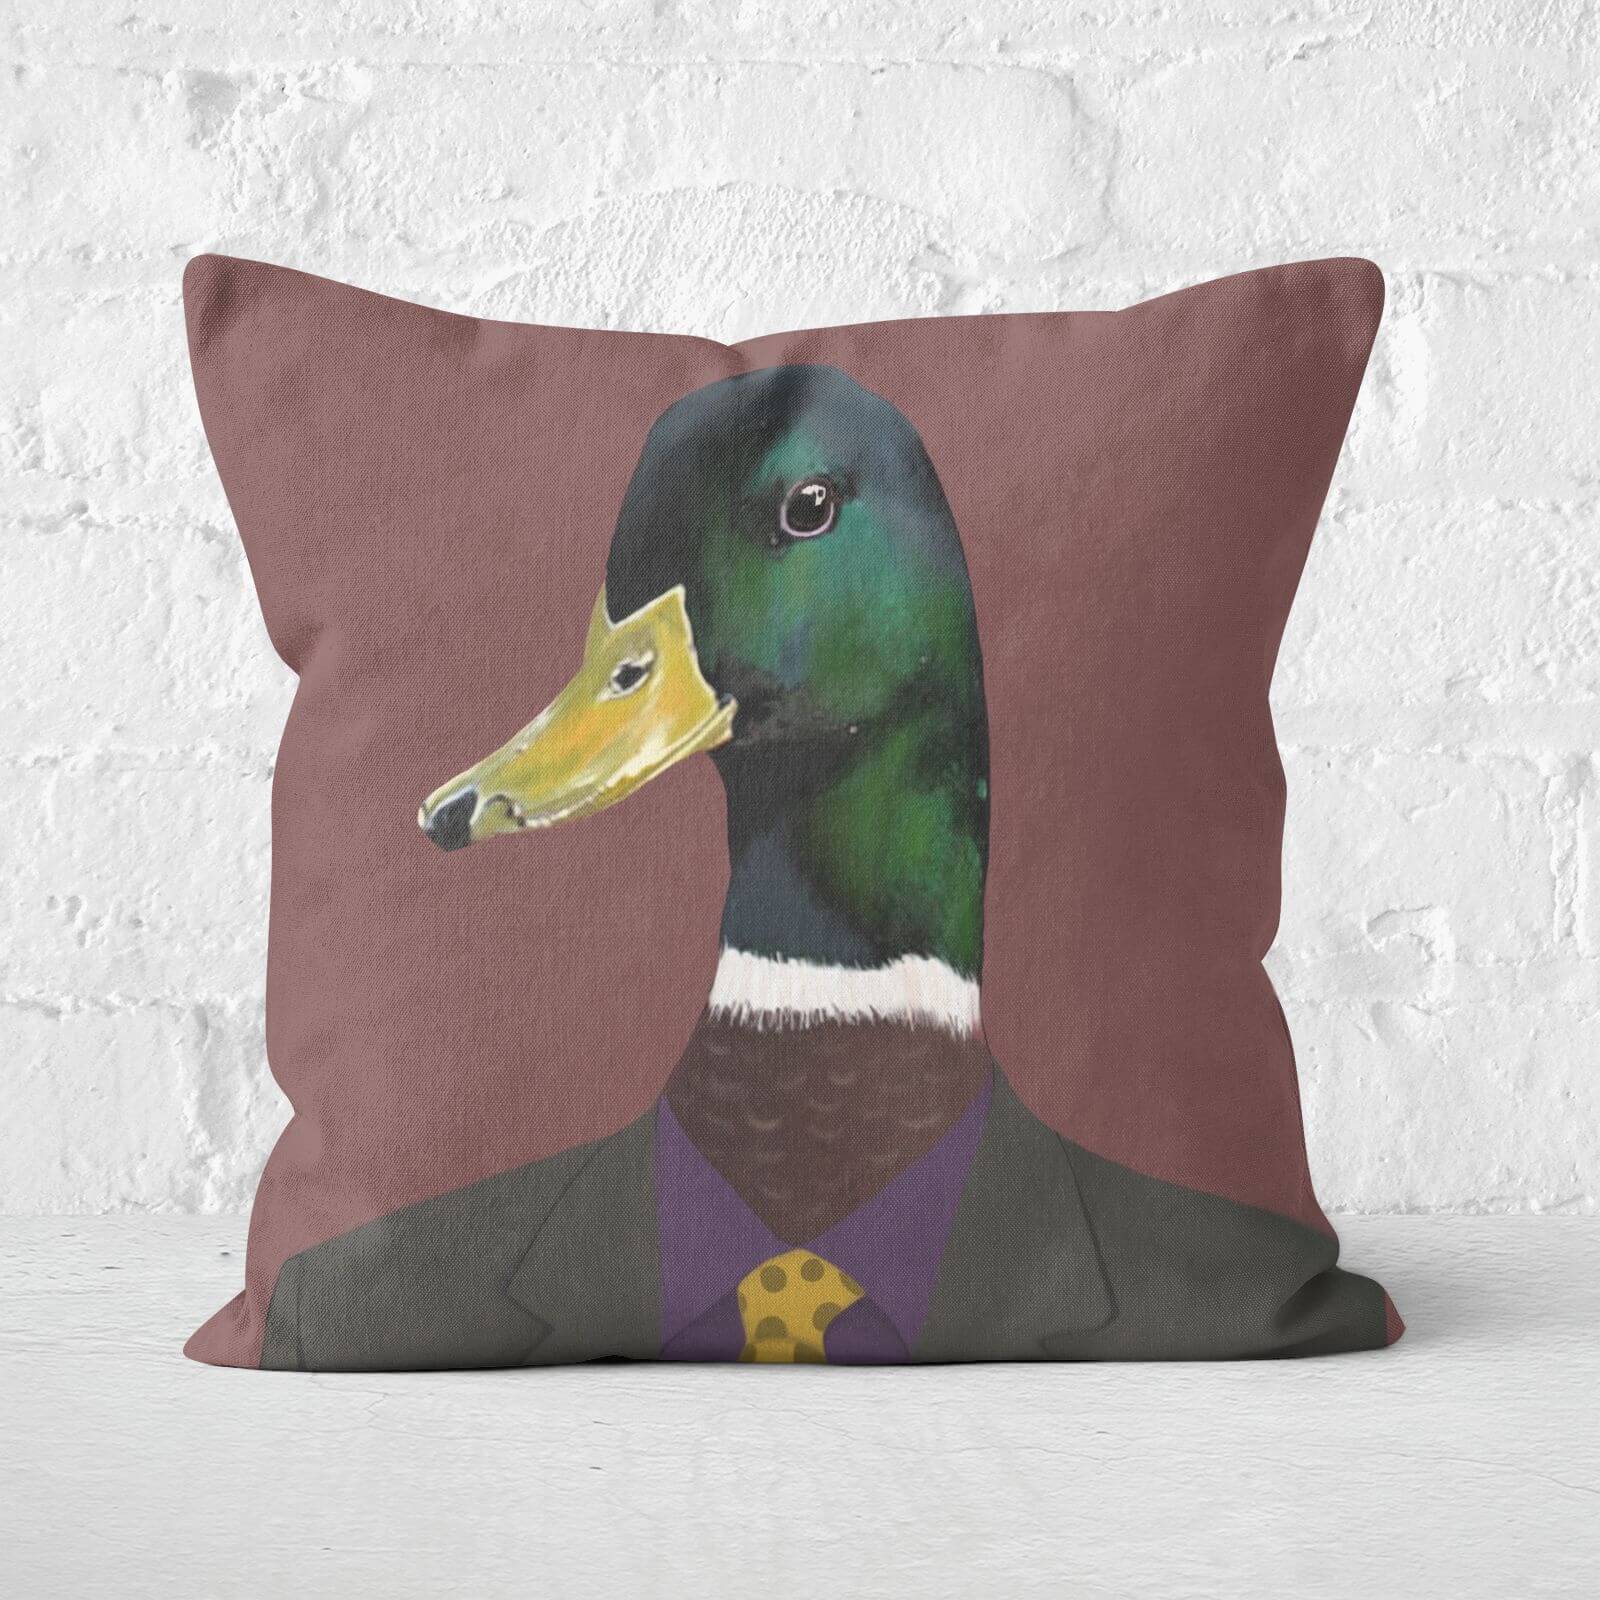 Duck In Suit Square Cushion - 40x40cm - Soft Touch